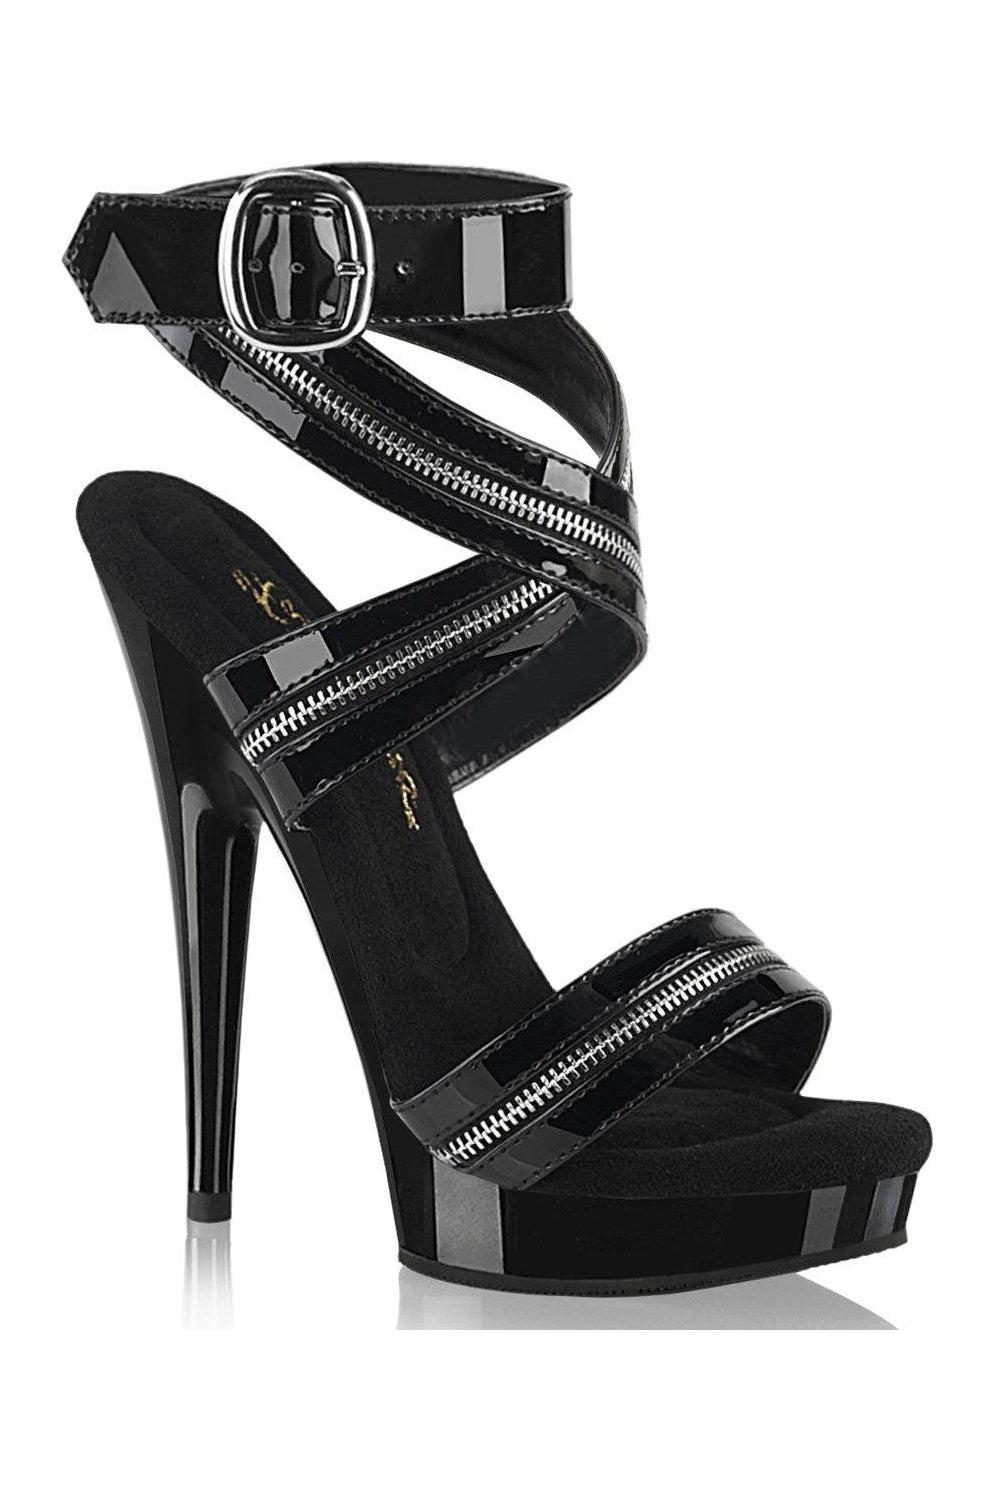 SULTRY-619 Sandal | Black Patent-Sandals-Fabulicious-Black-14-Patent-SEXYSHOES.COM